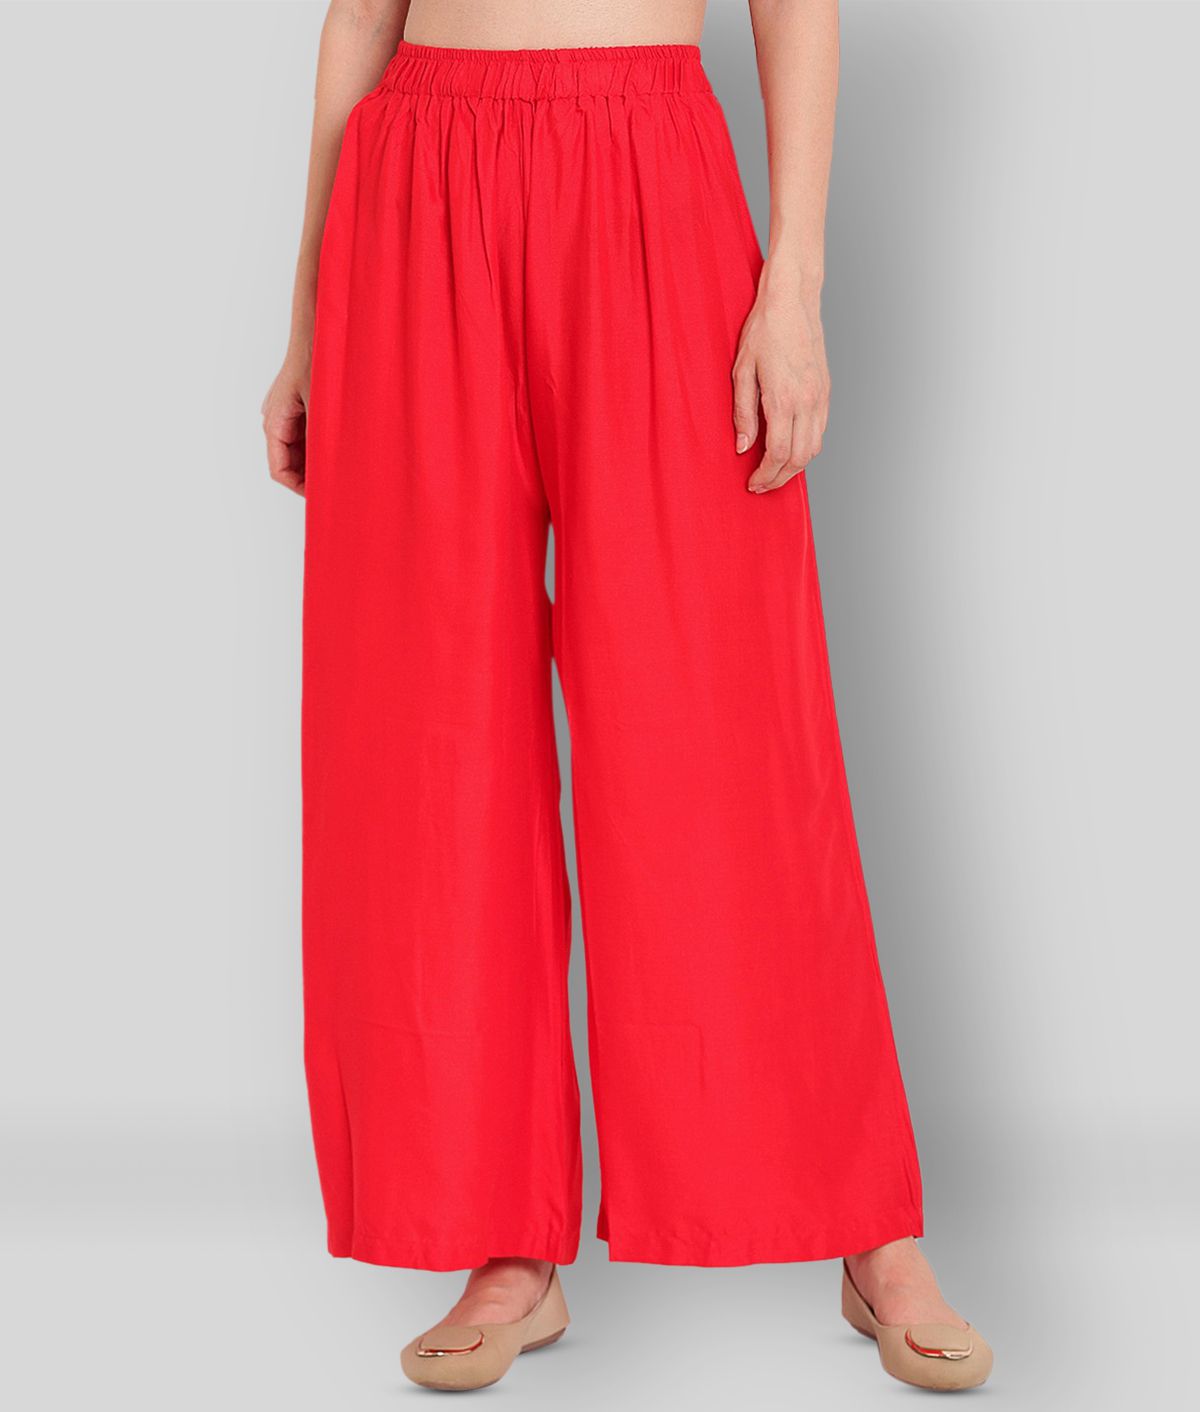     			Estela - Red Rayon Wide Leg Women's Palazzos ( Pack of 1 )